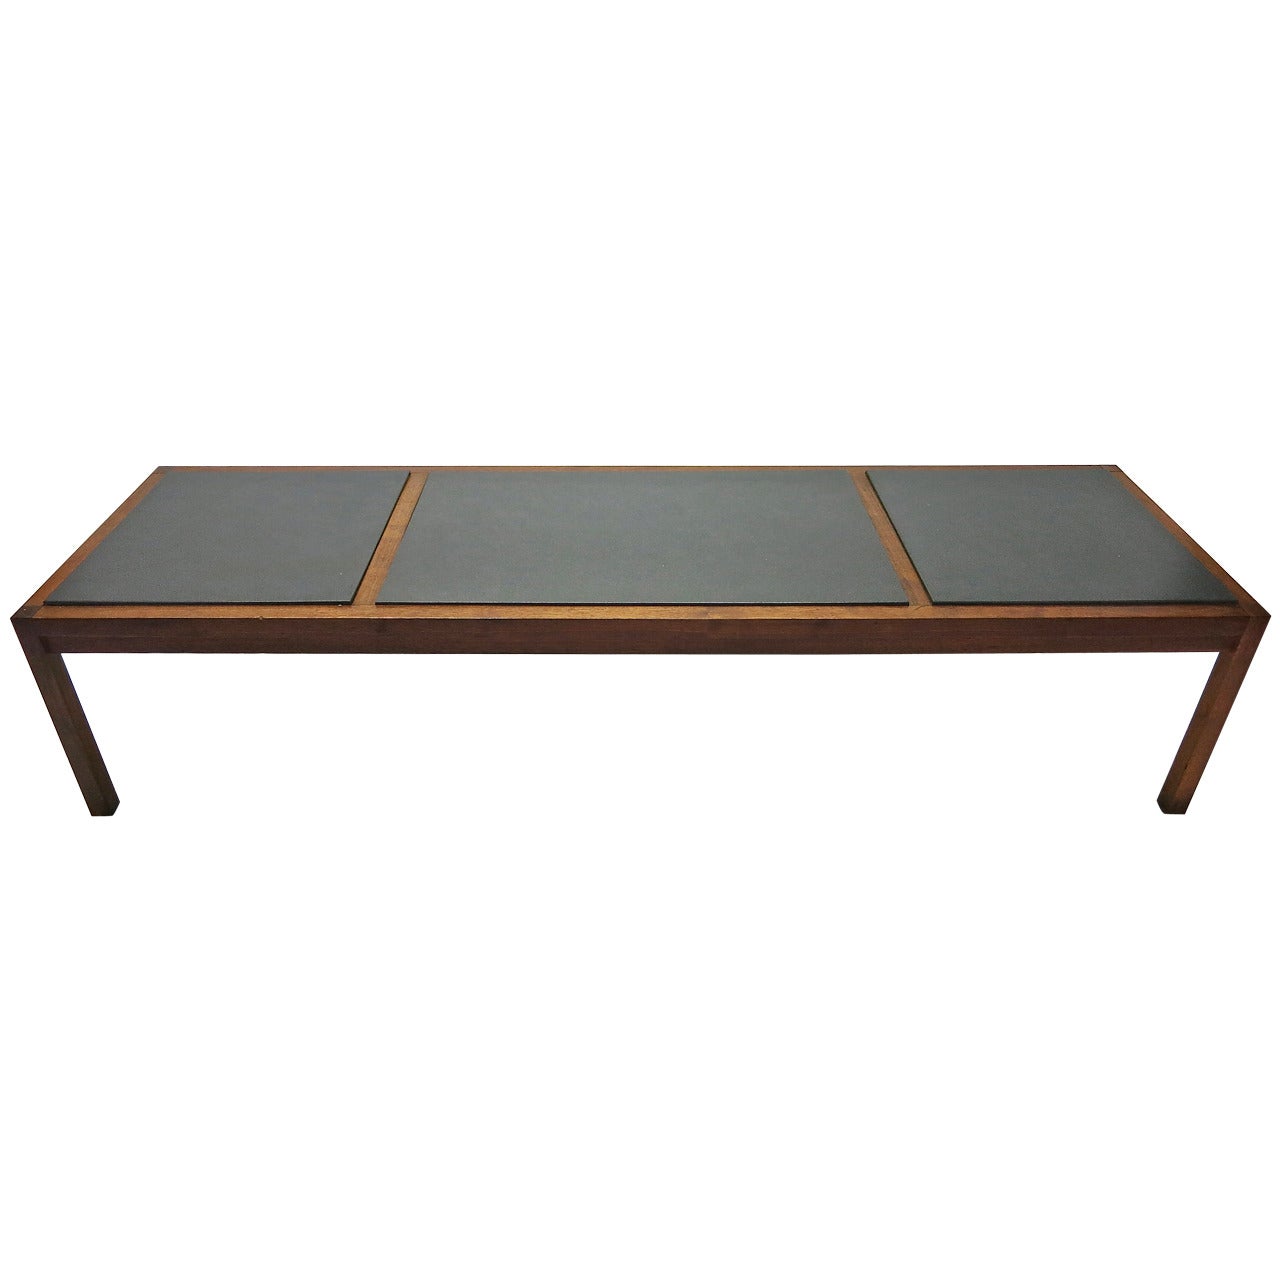 Coffee Table in the Style of Harvey Probber, America, circa 1945